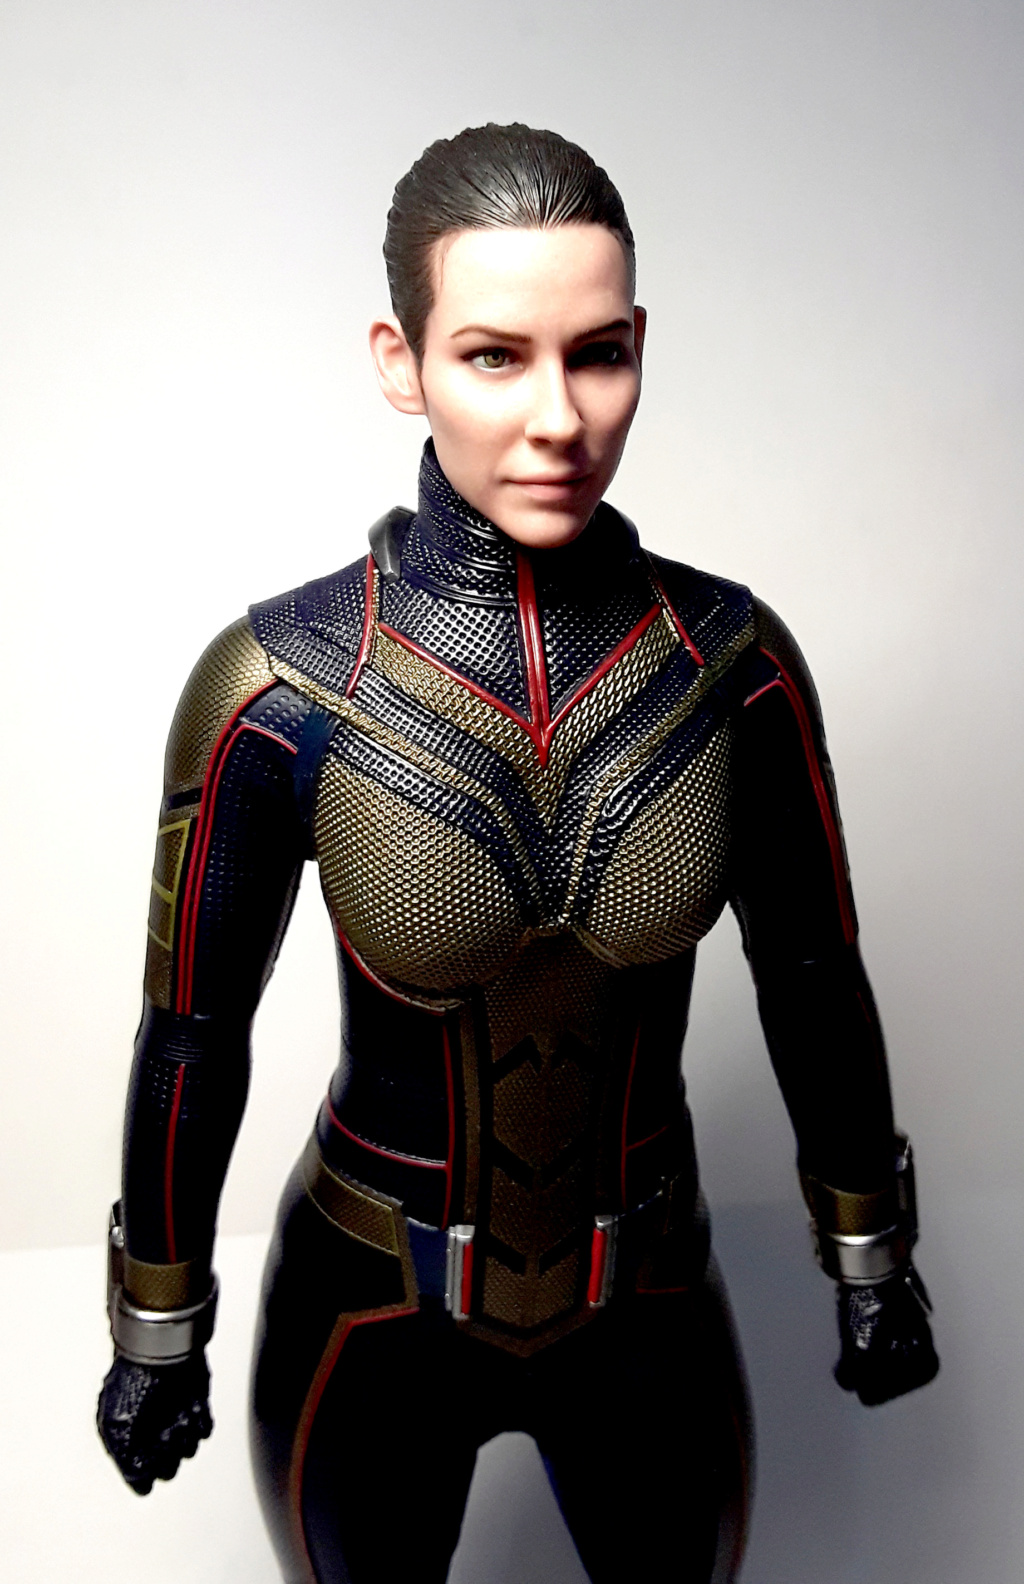 AntmanAndTheWasp - NEW PRODUCT: HOT TOYS: ANT-MAN AND THE WASP - THE WASP 1/6 COLLECTIBLE FIGURE (Full Details UP) Wasp_110